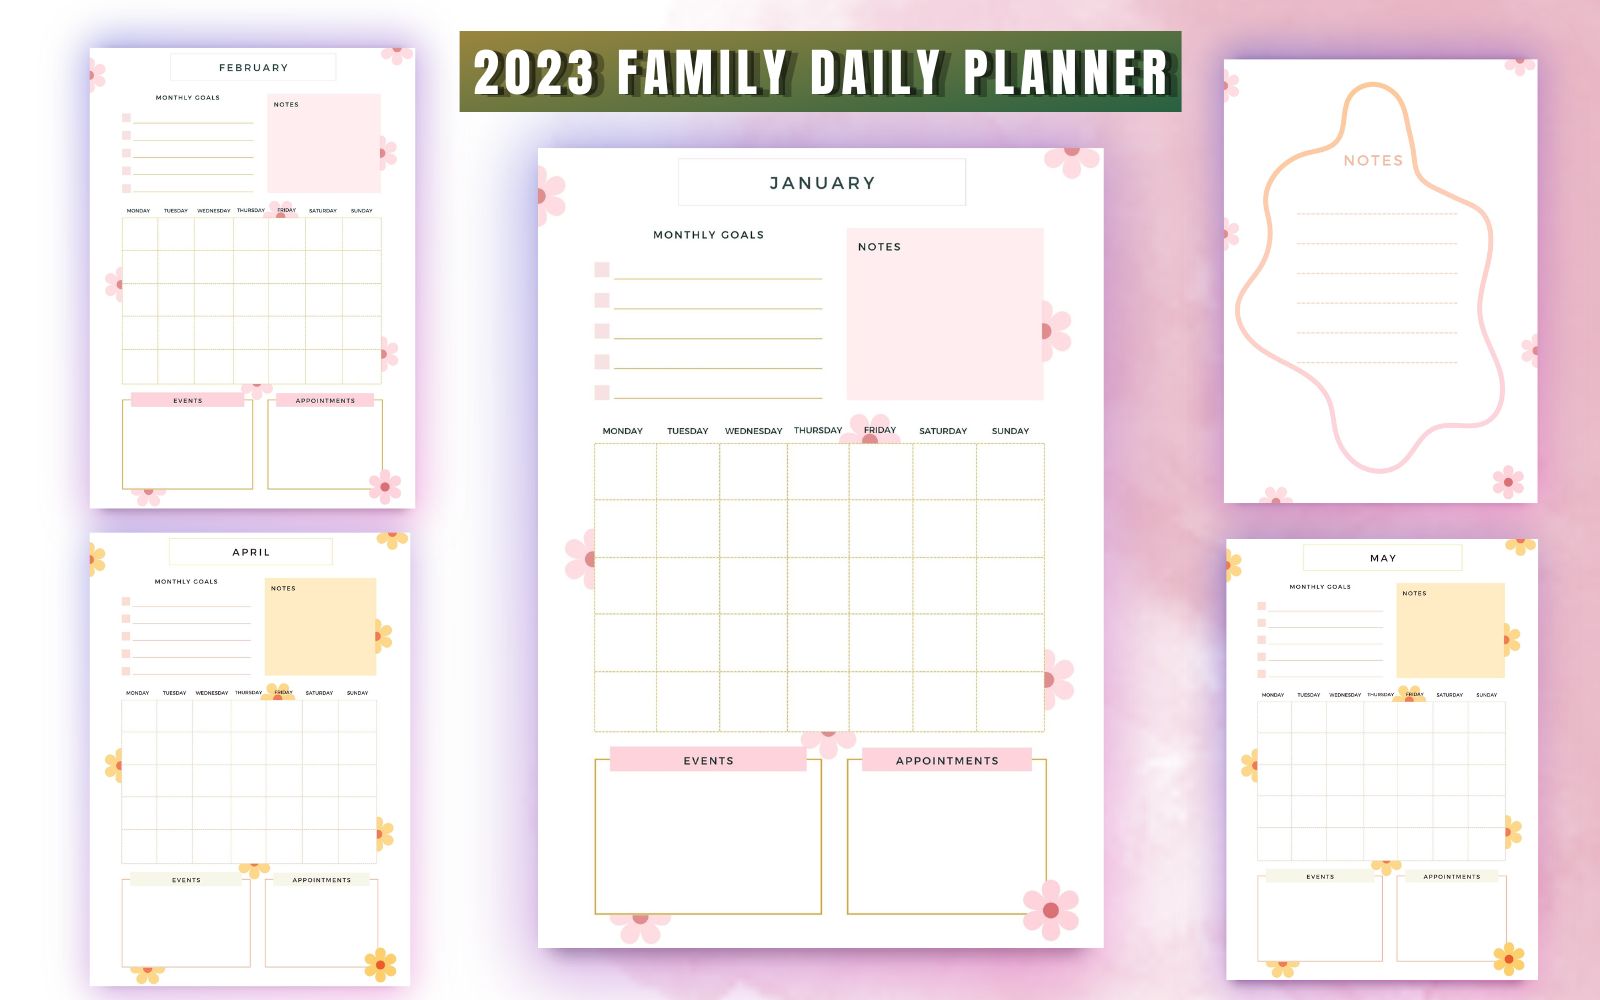 2023 DAILY PLANNER Print Ready Format